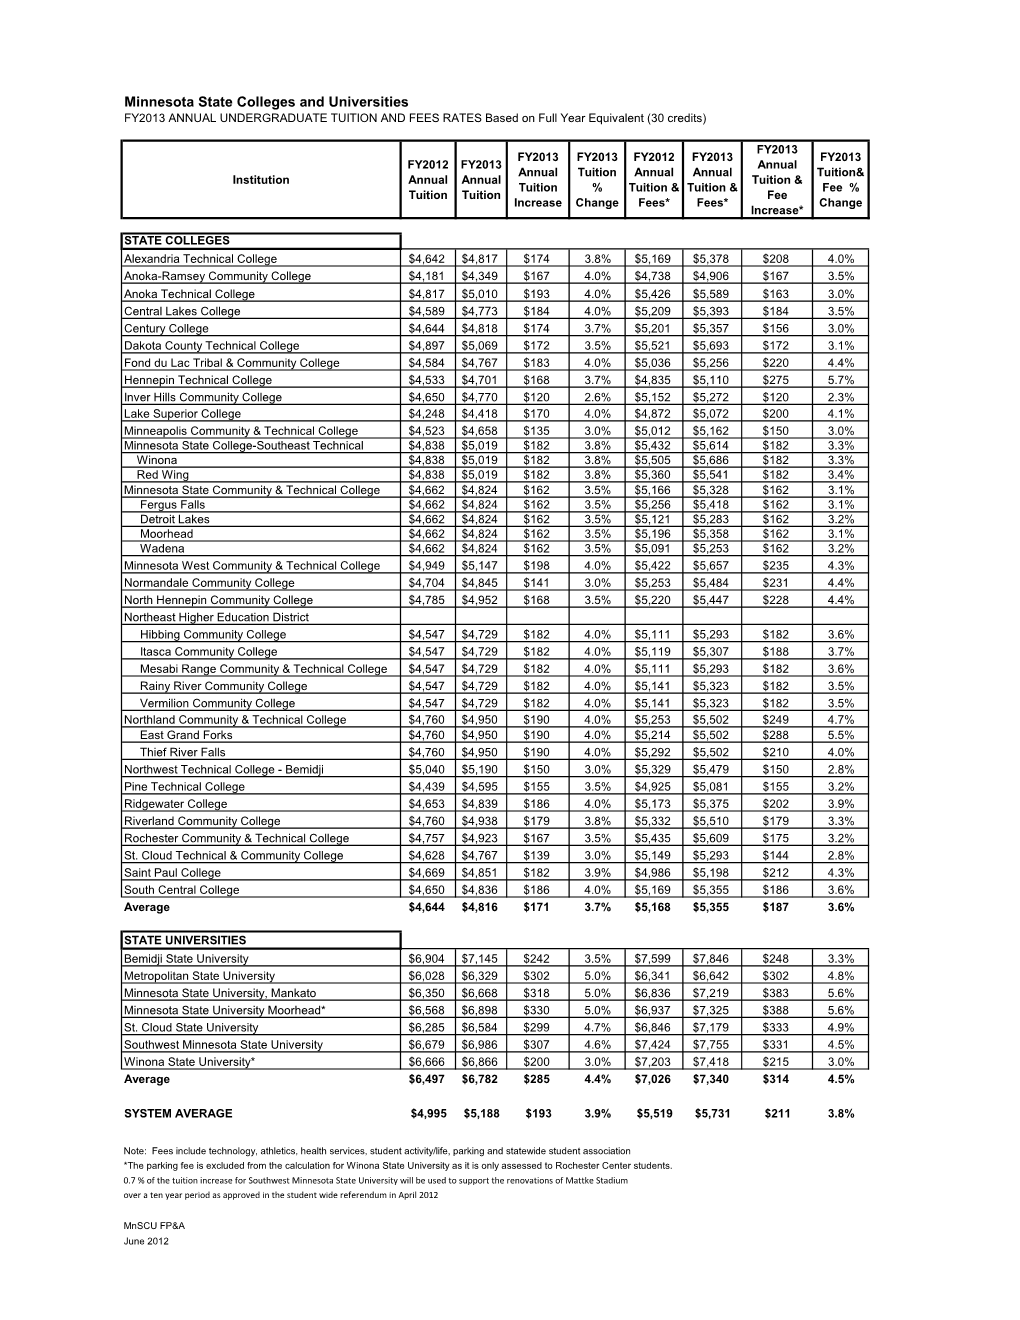 Minnesota State Colleges and Universities FY2013 ANNUAL UNDERGRADUATE TUITION and FEES RATES Based on Full Year Equivalent (30 Credits)